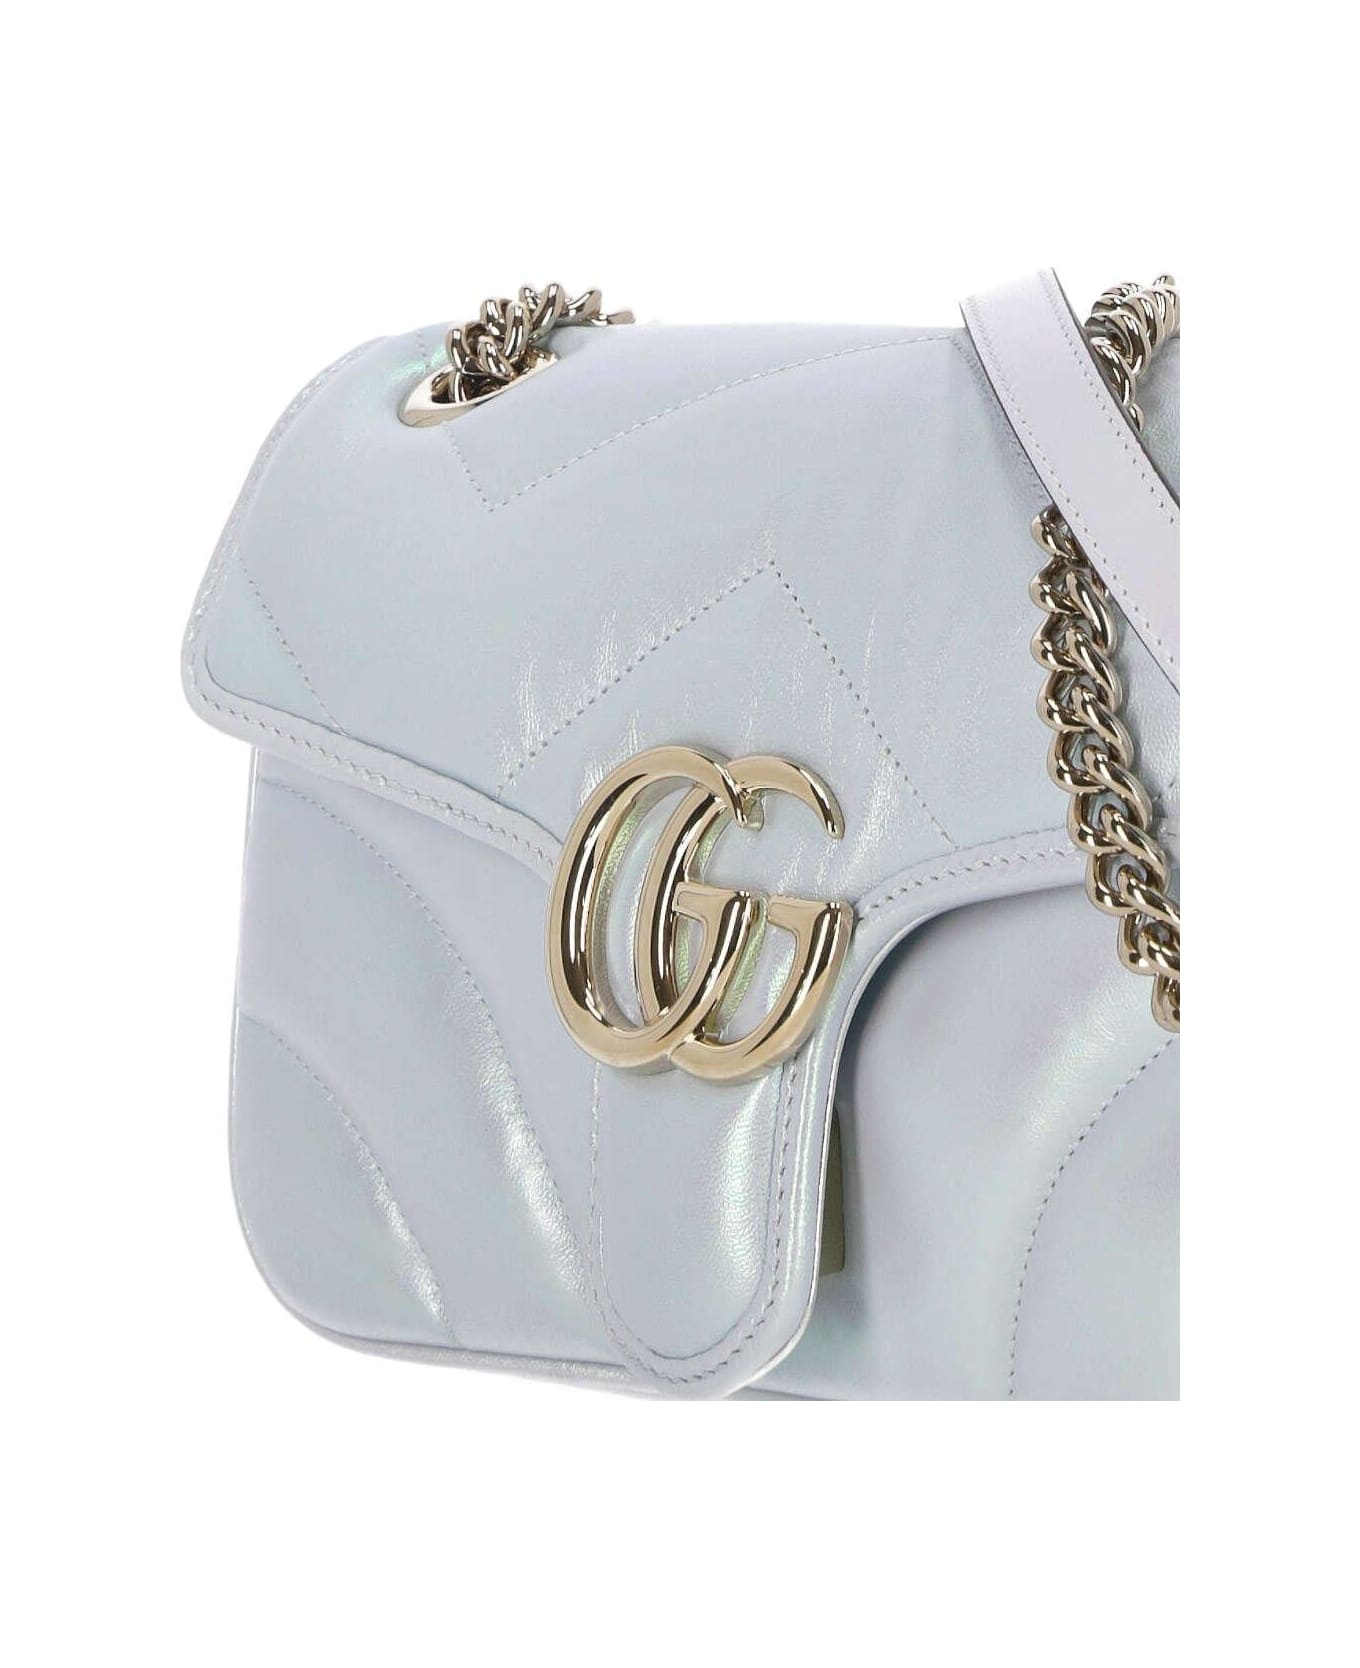 Gg Marmont Small Shoulder Bag - 4